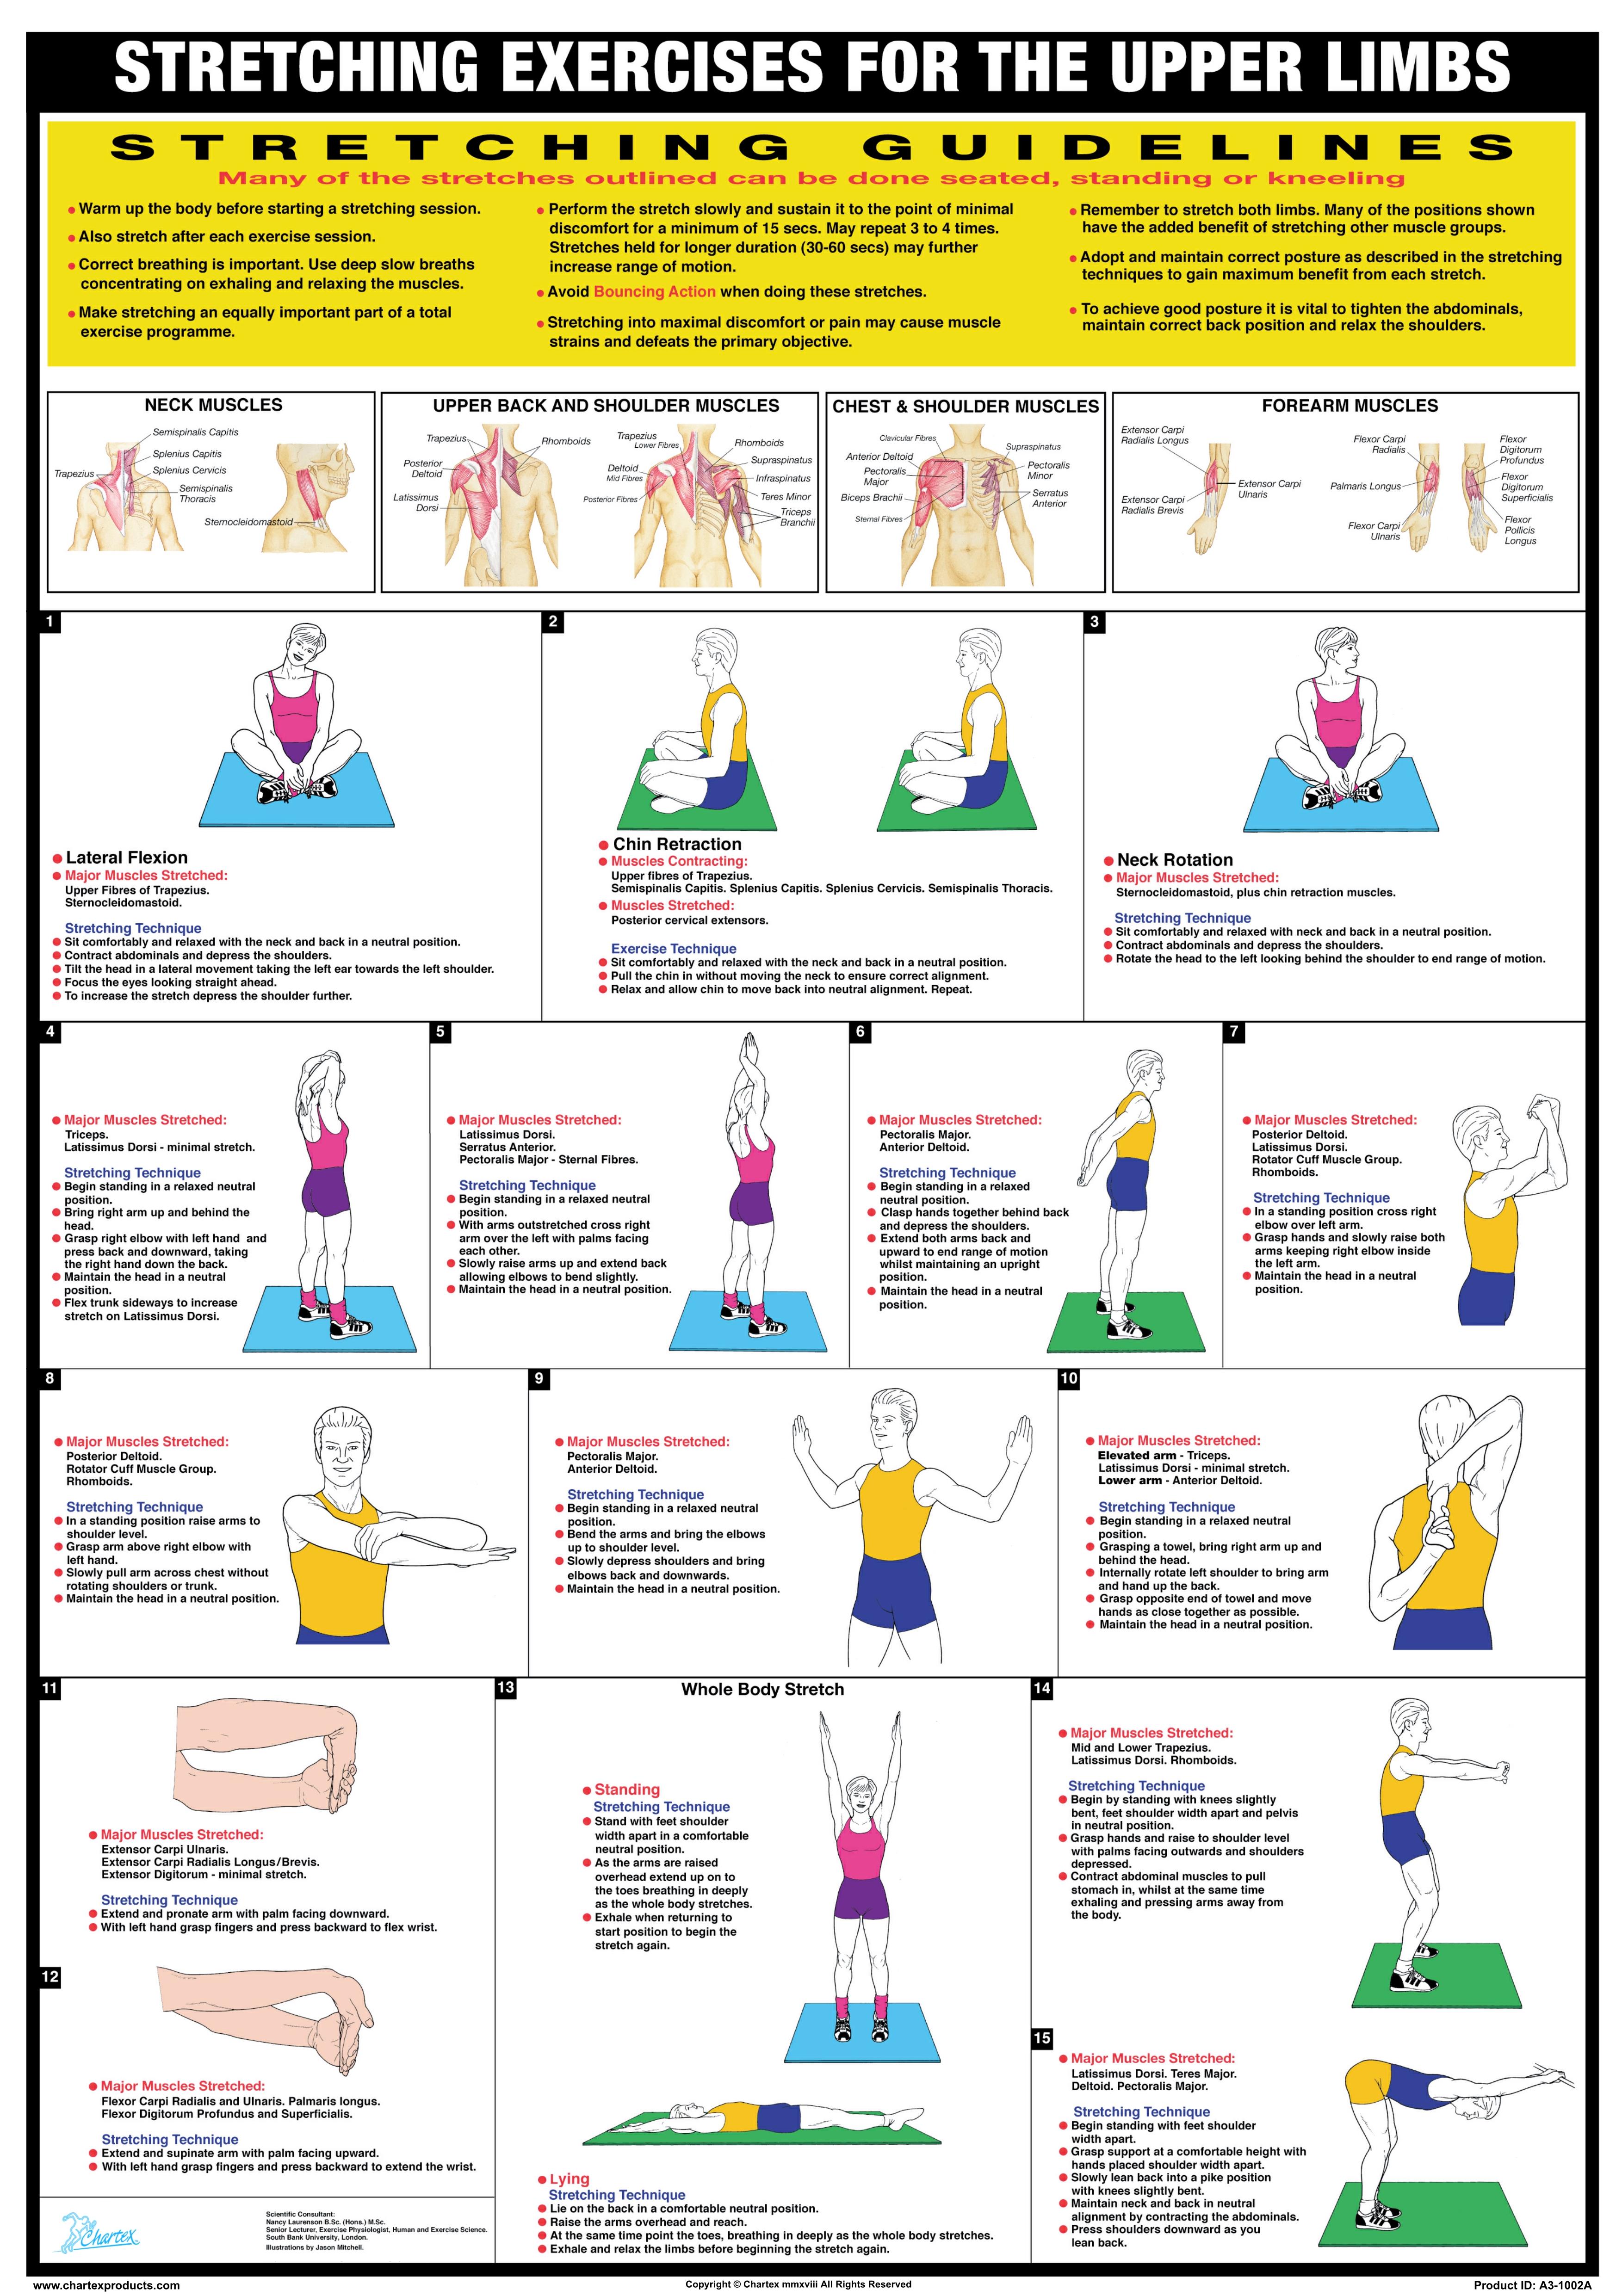 STRETCHING EXERCISES Professional Fitness Gym Wall Charts 3 POSTER SET byChartex 